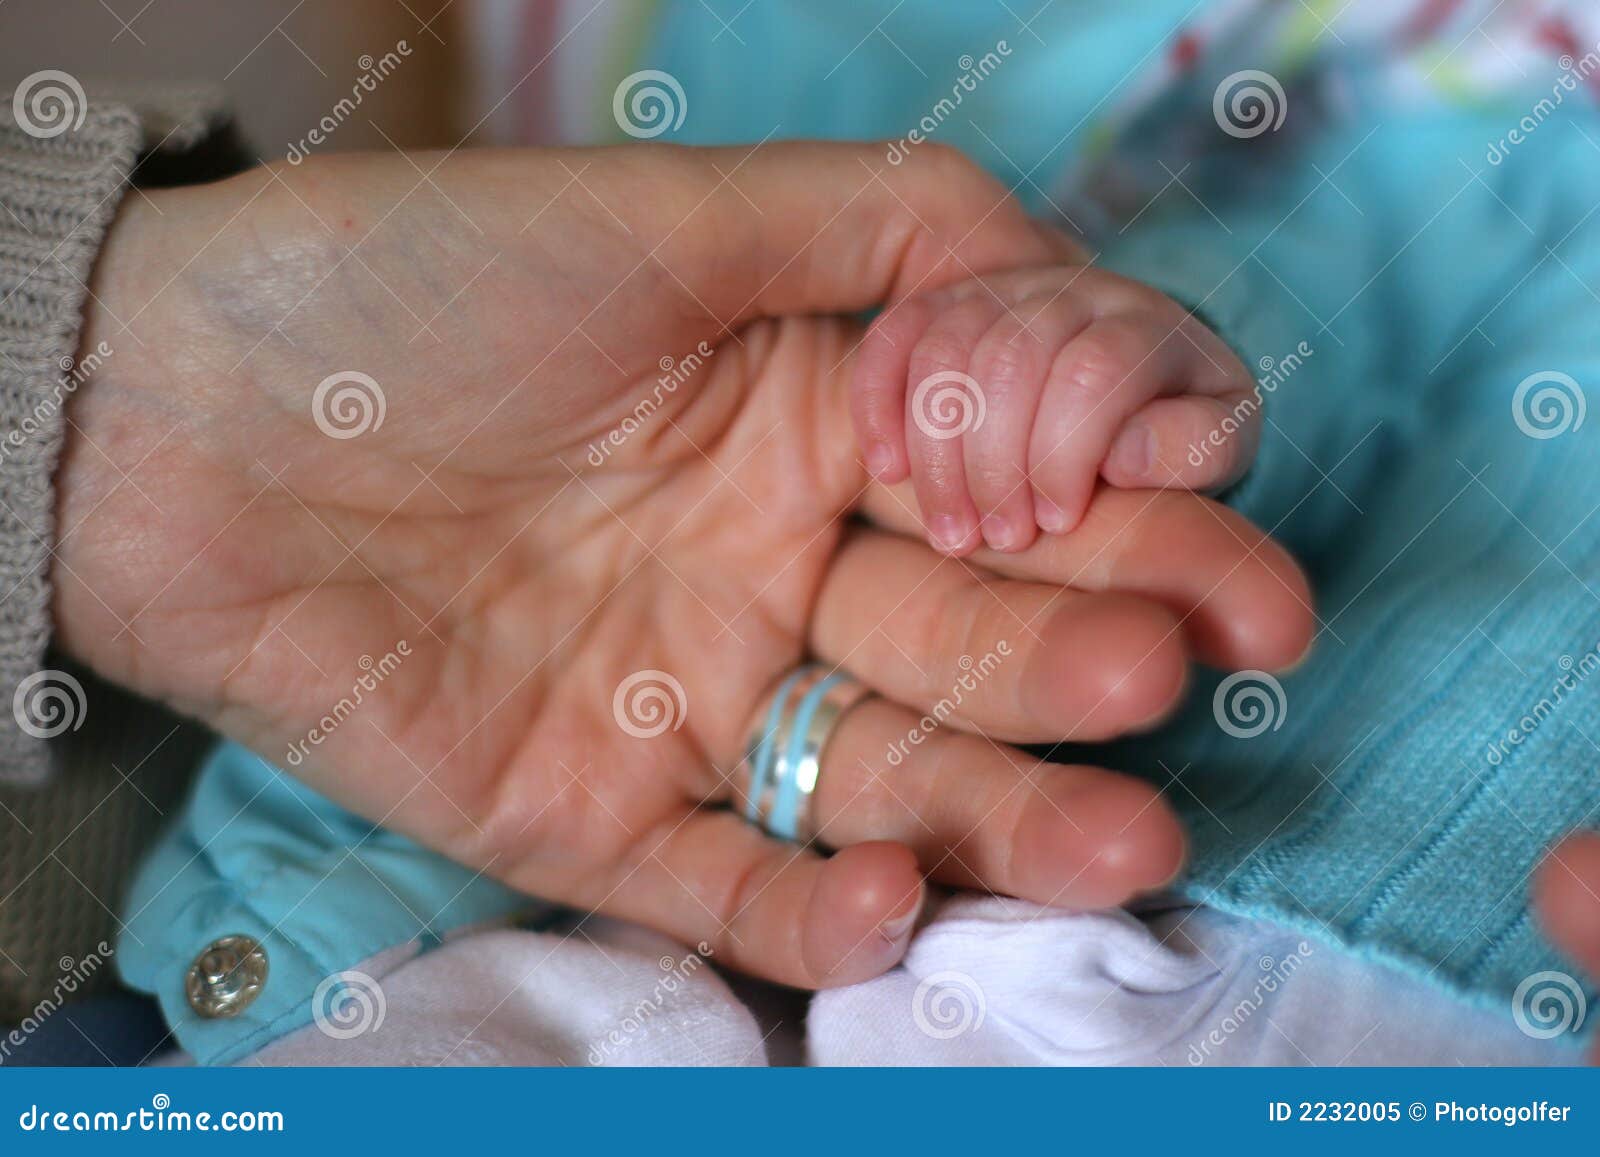 baby hands with father